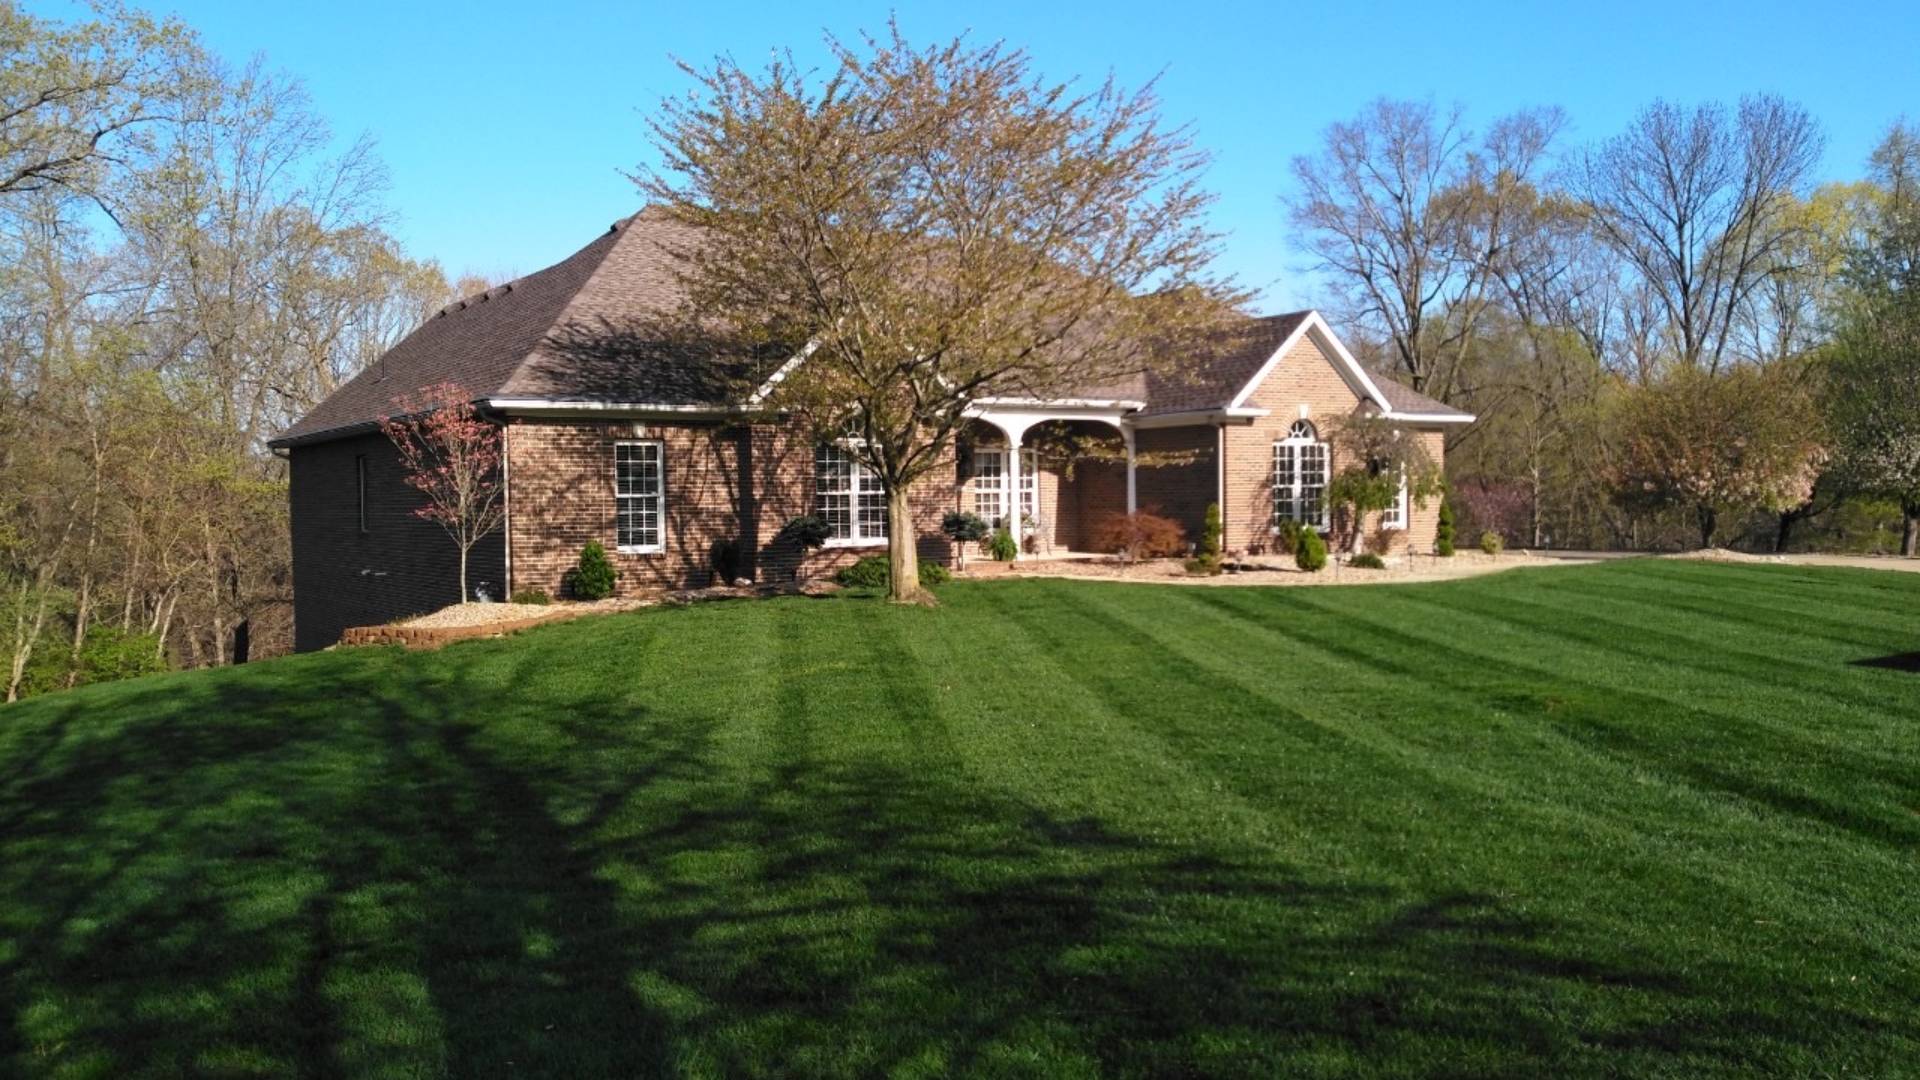 Home with freshly mowed lawn in Rosewood Heights, IL.